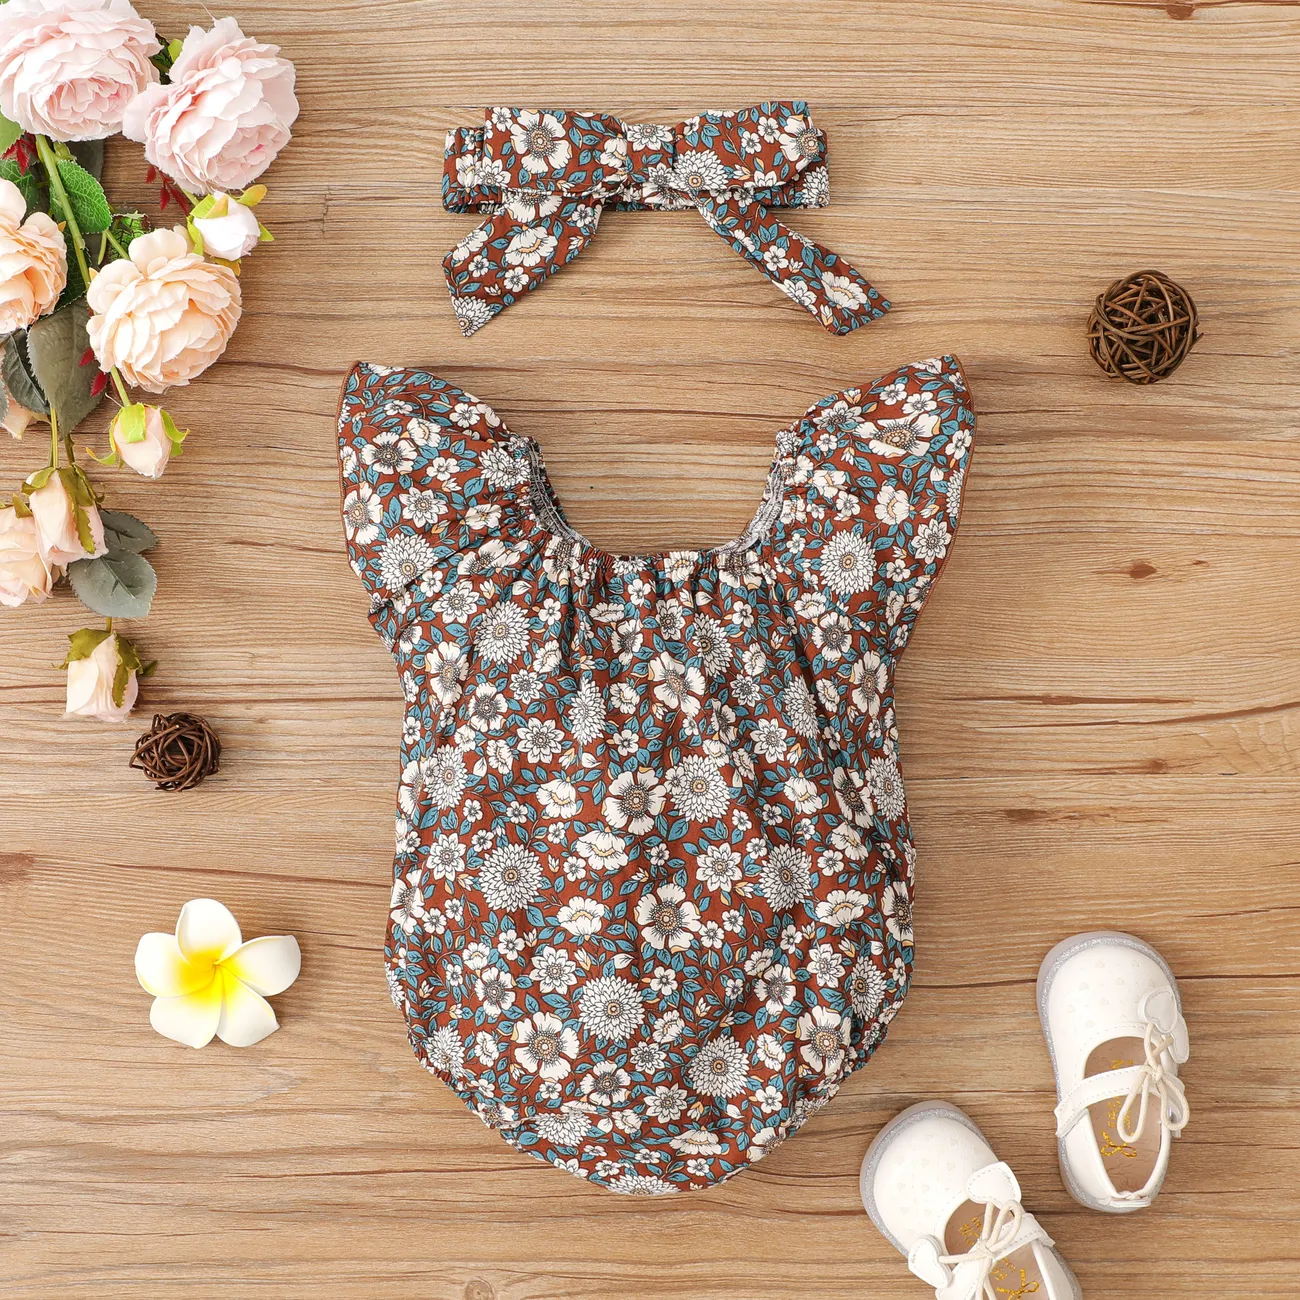 Girl's Sleeveless Romper with Floral Design, 2-Piece Set, Sweet Style, 100% Cotton, Baby One Piece Brown- big image 1